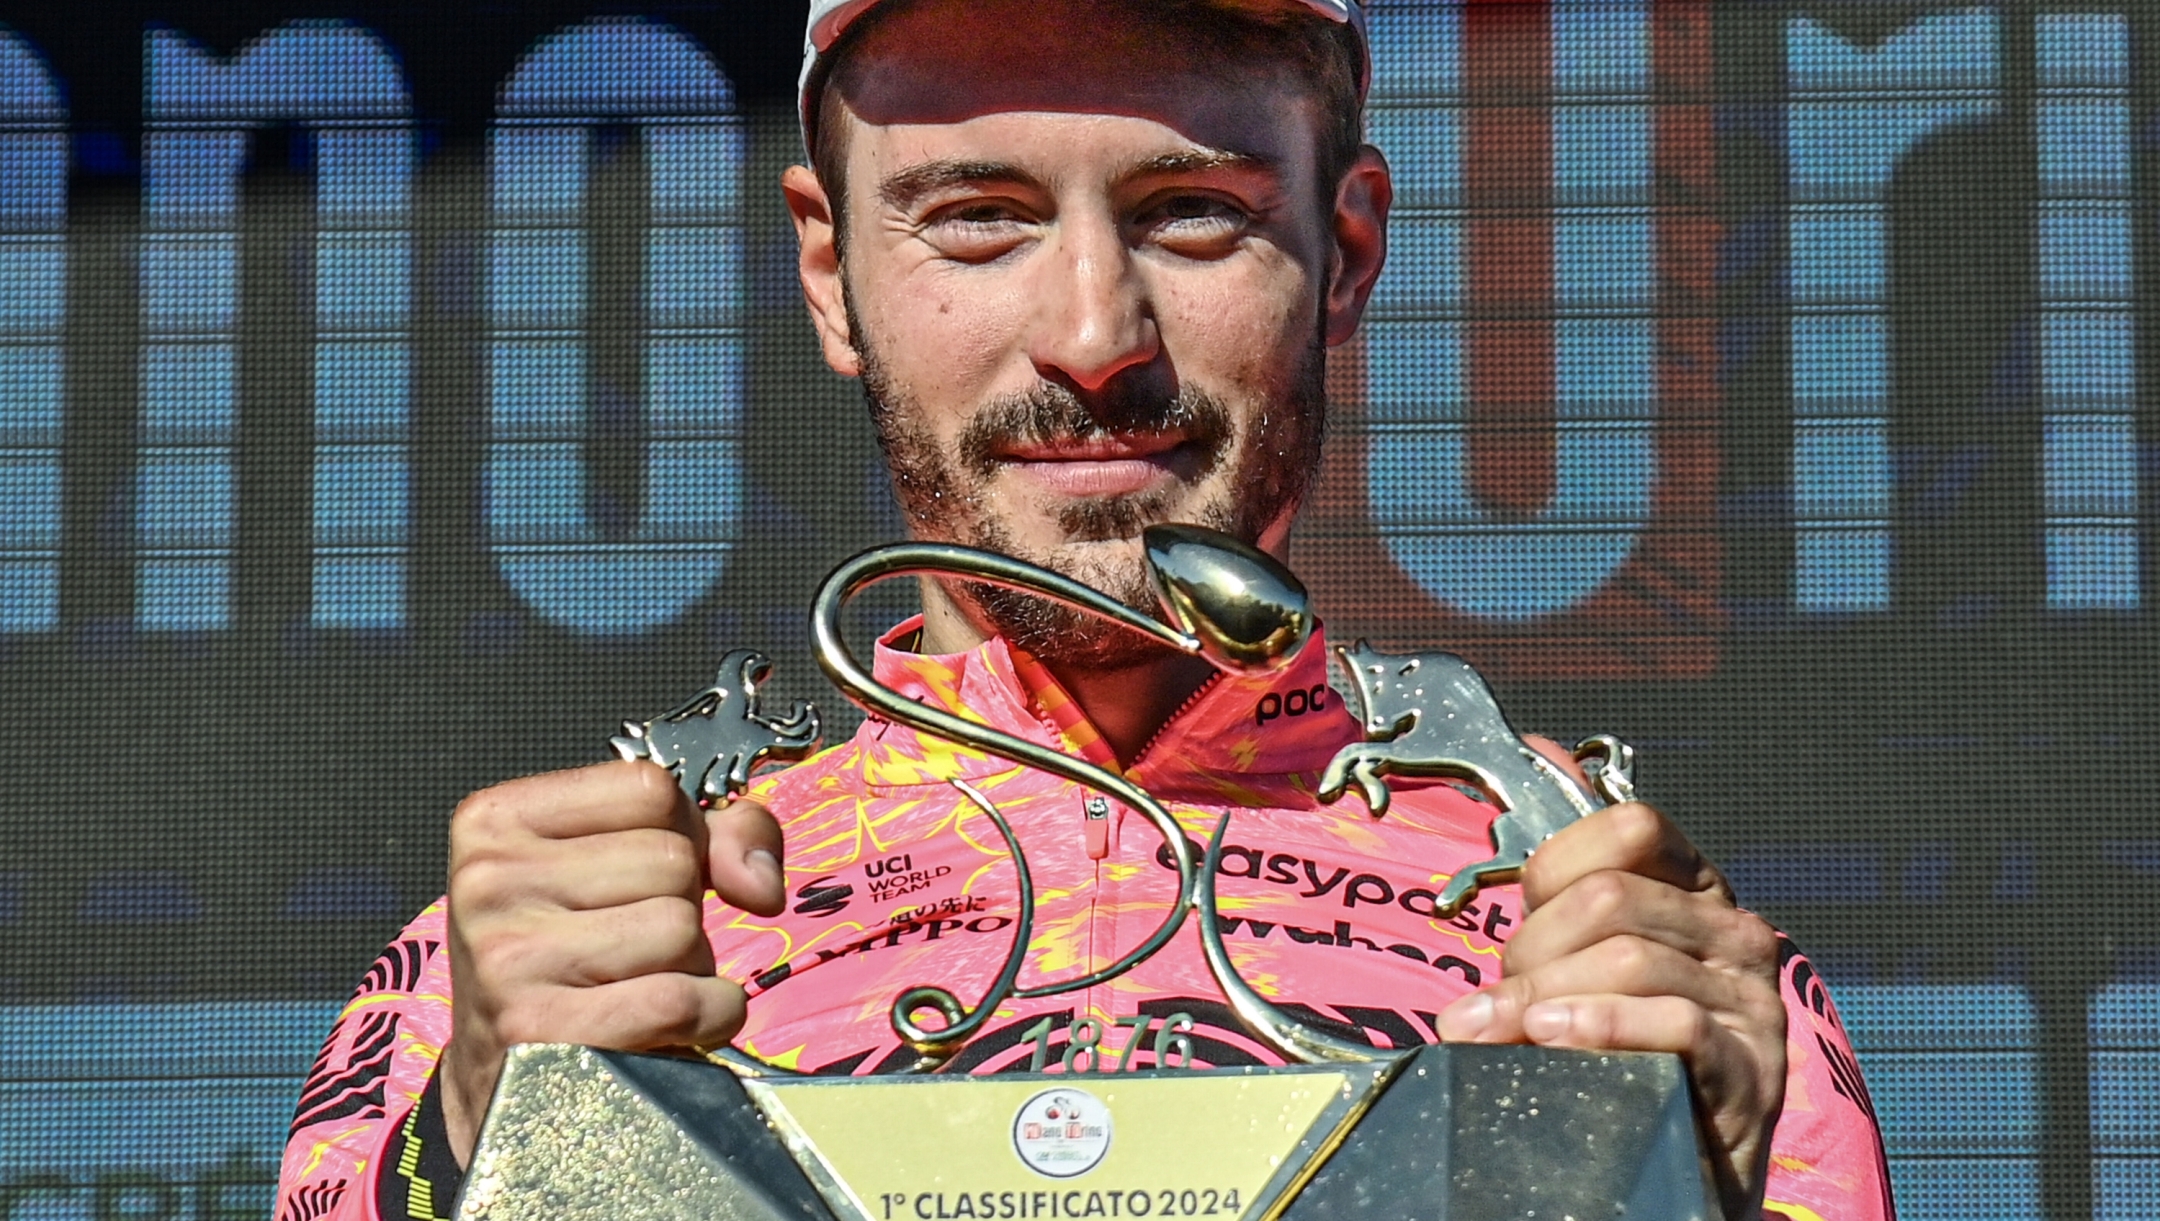 Alberto Bettiol (EF EDUCATION - EASYPOST) celebrates with the trophy his victory on the podium after winning the men's elite race of the Milano-Torino one day cycling race (177km) from Rho and to Salassa - North West Italy - Wednesday, March 13, 2024. Sport, Cycling. (Photo by Gian Mattia D'Alberto/LaPresse)